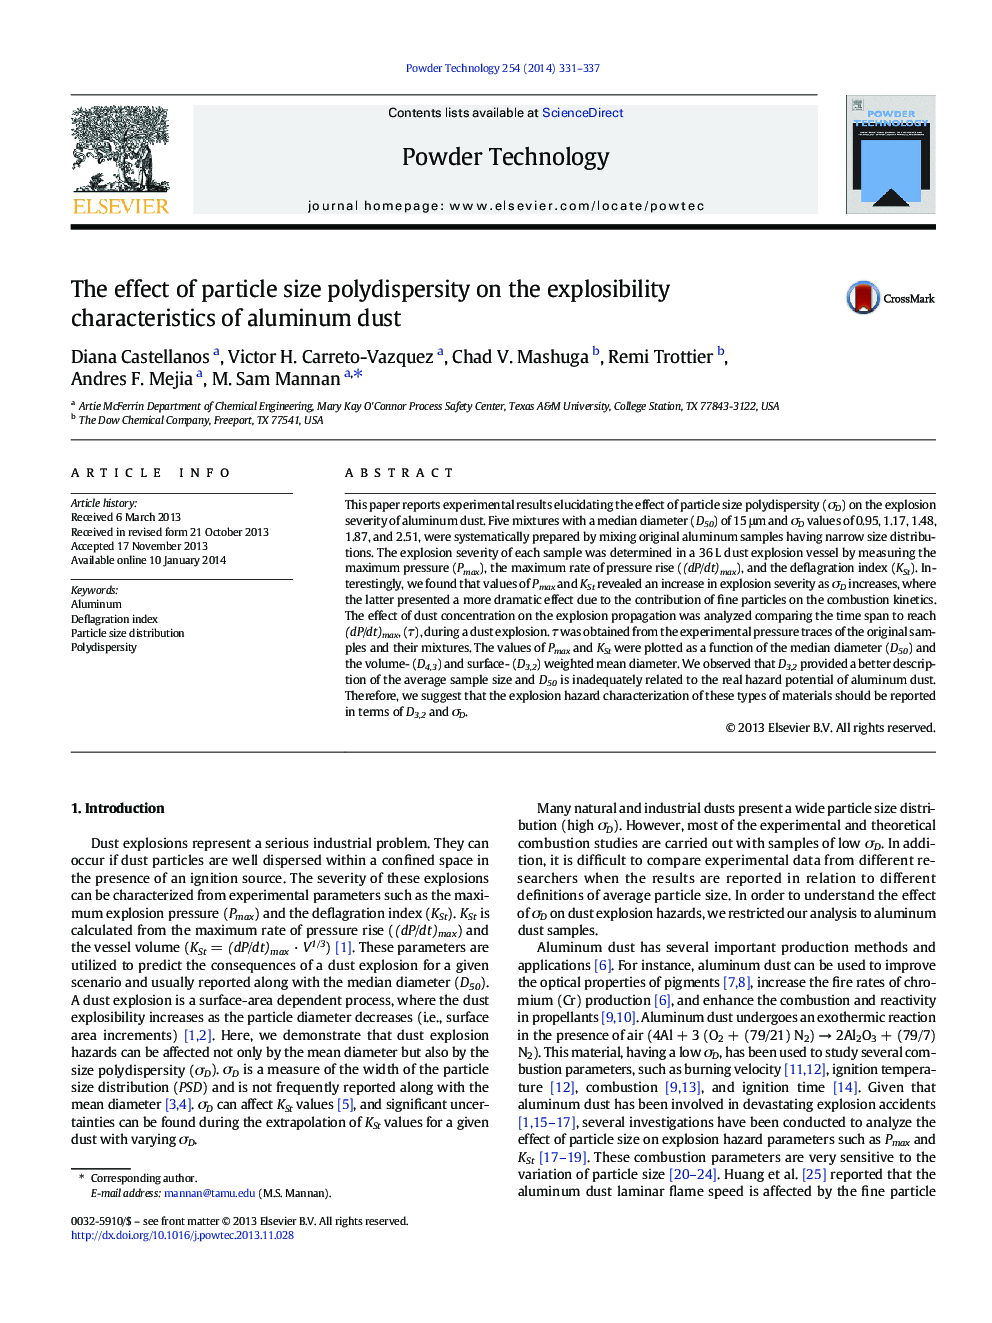 The effect of particle size polydispersity on the explosibility characteristics of aluminum dust